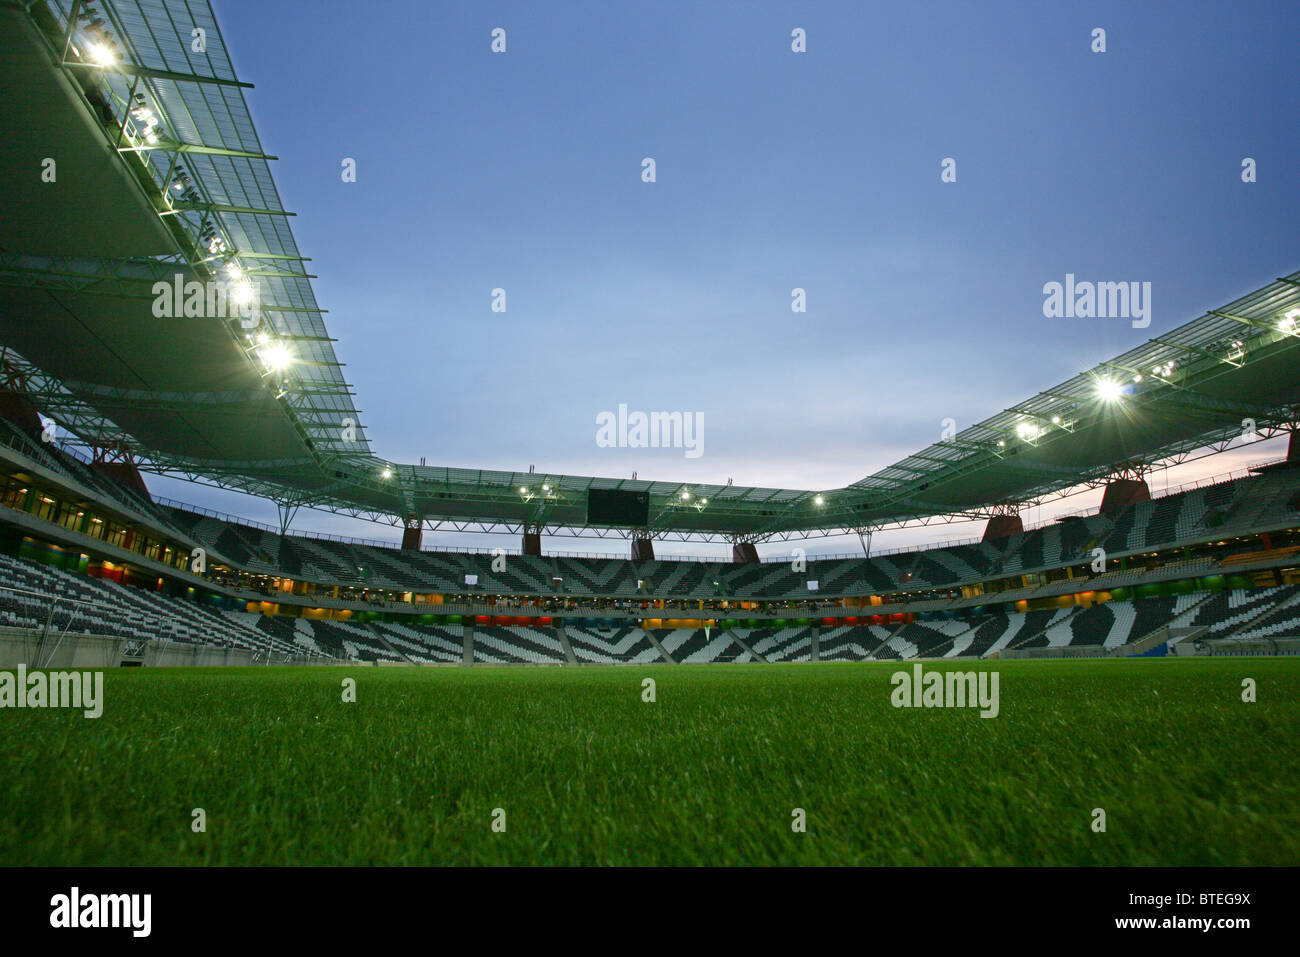 Interior of the Mbombela stadium at dusk showing the zebra-striped seating an a lush, green, playing surface Stock Photo